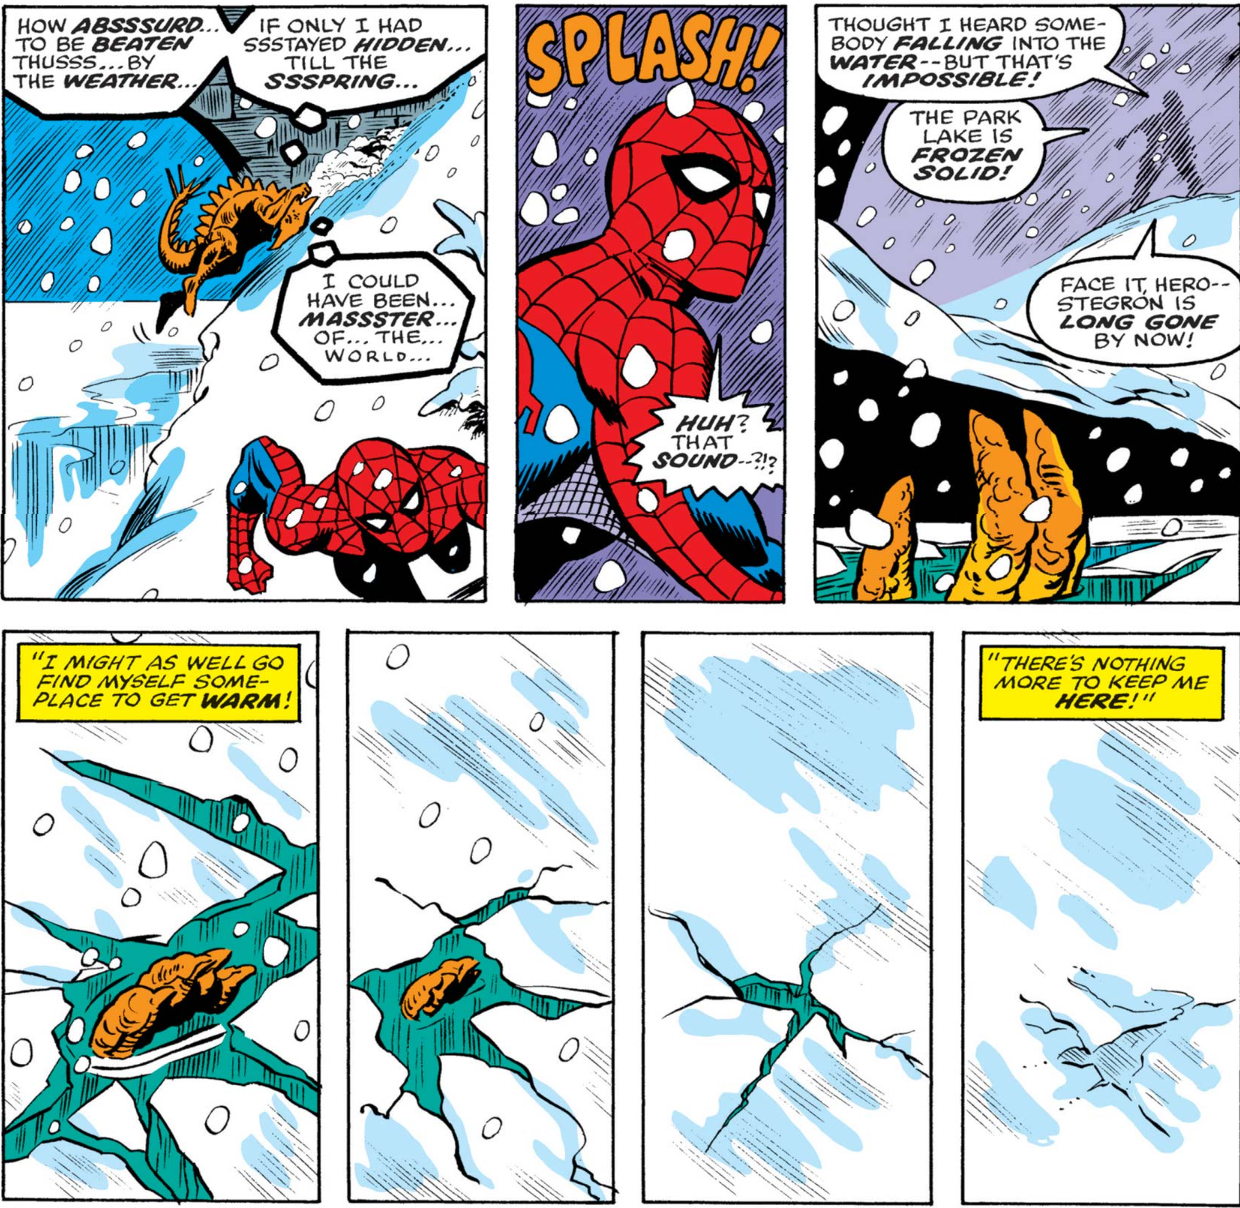 Interior comics panels featuring Spider-Man and the Lizard in the snow